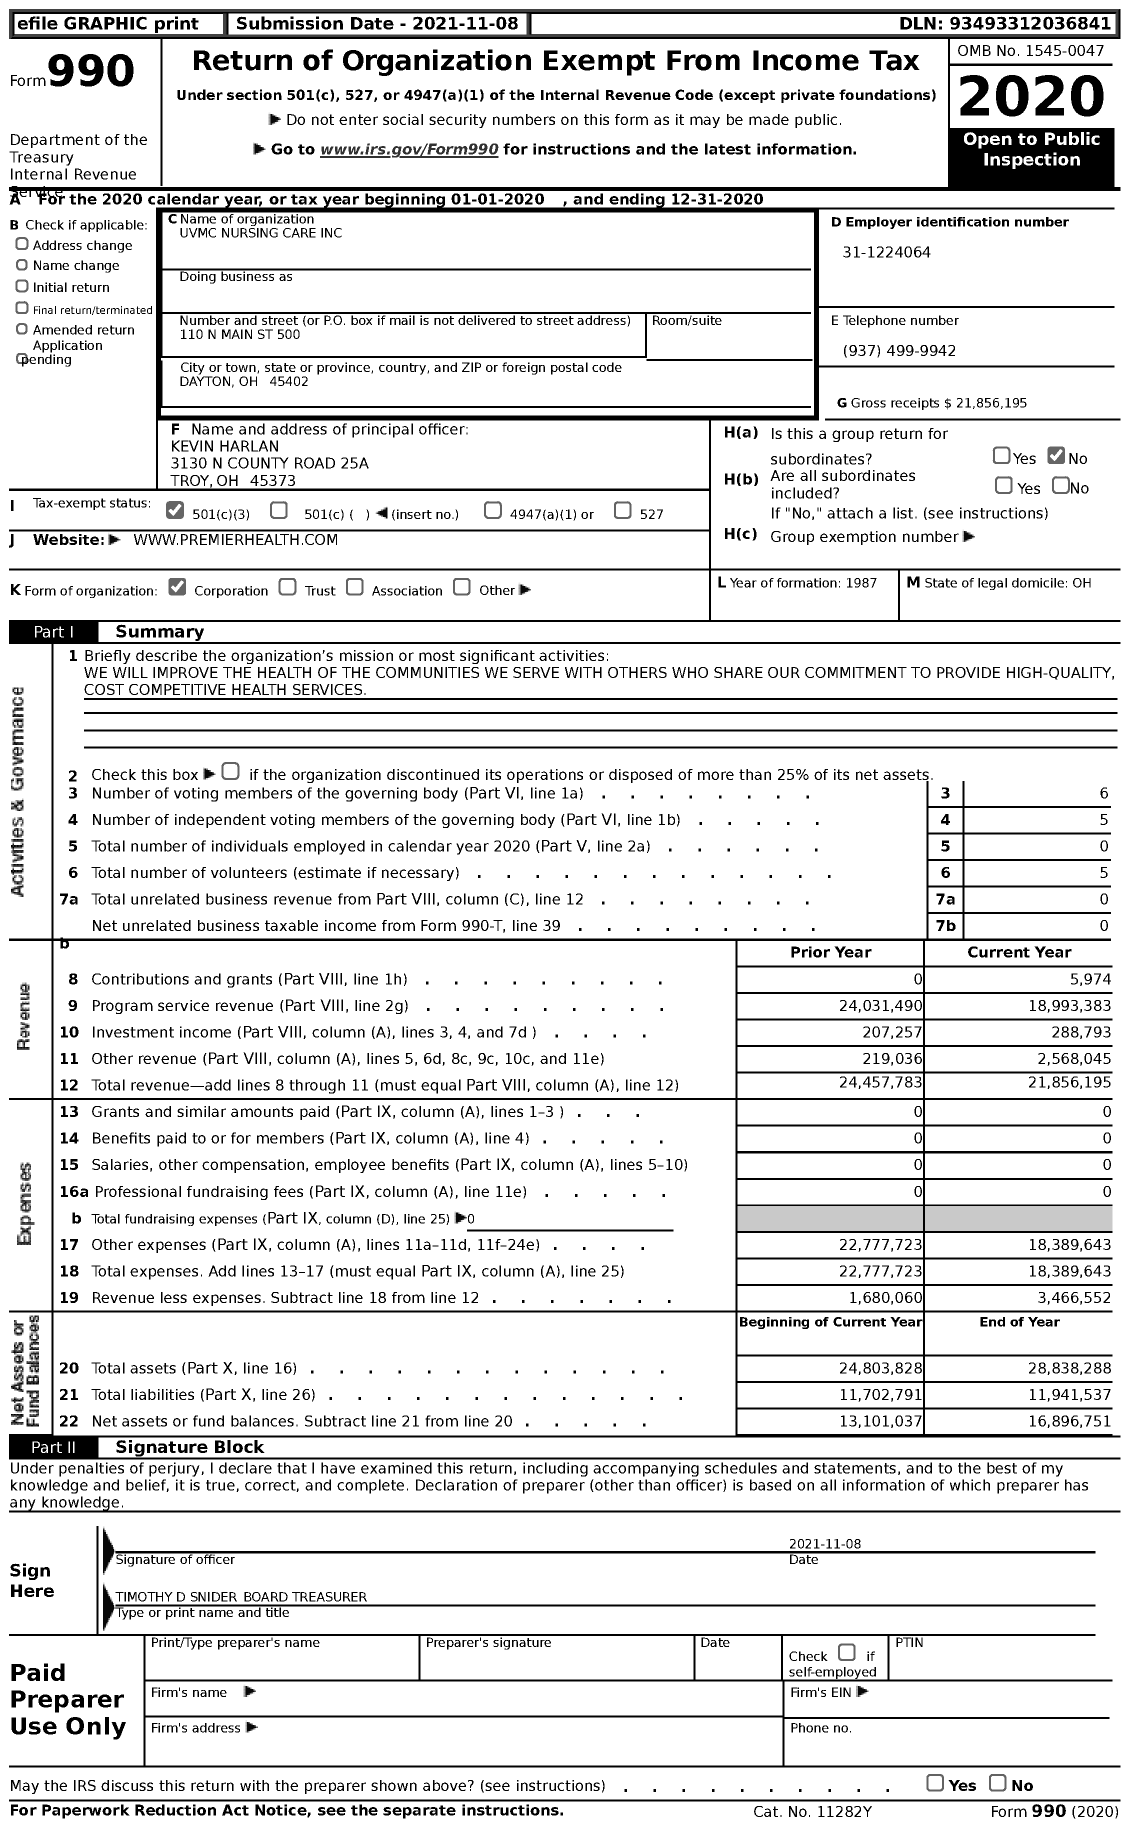 Image of first page of 2020 Form 990 for UVMC Nursing Care